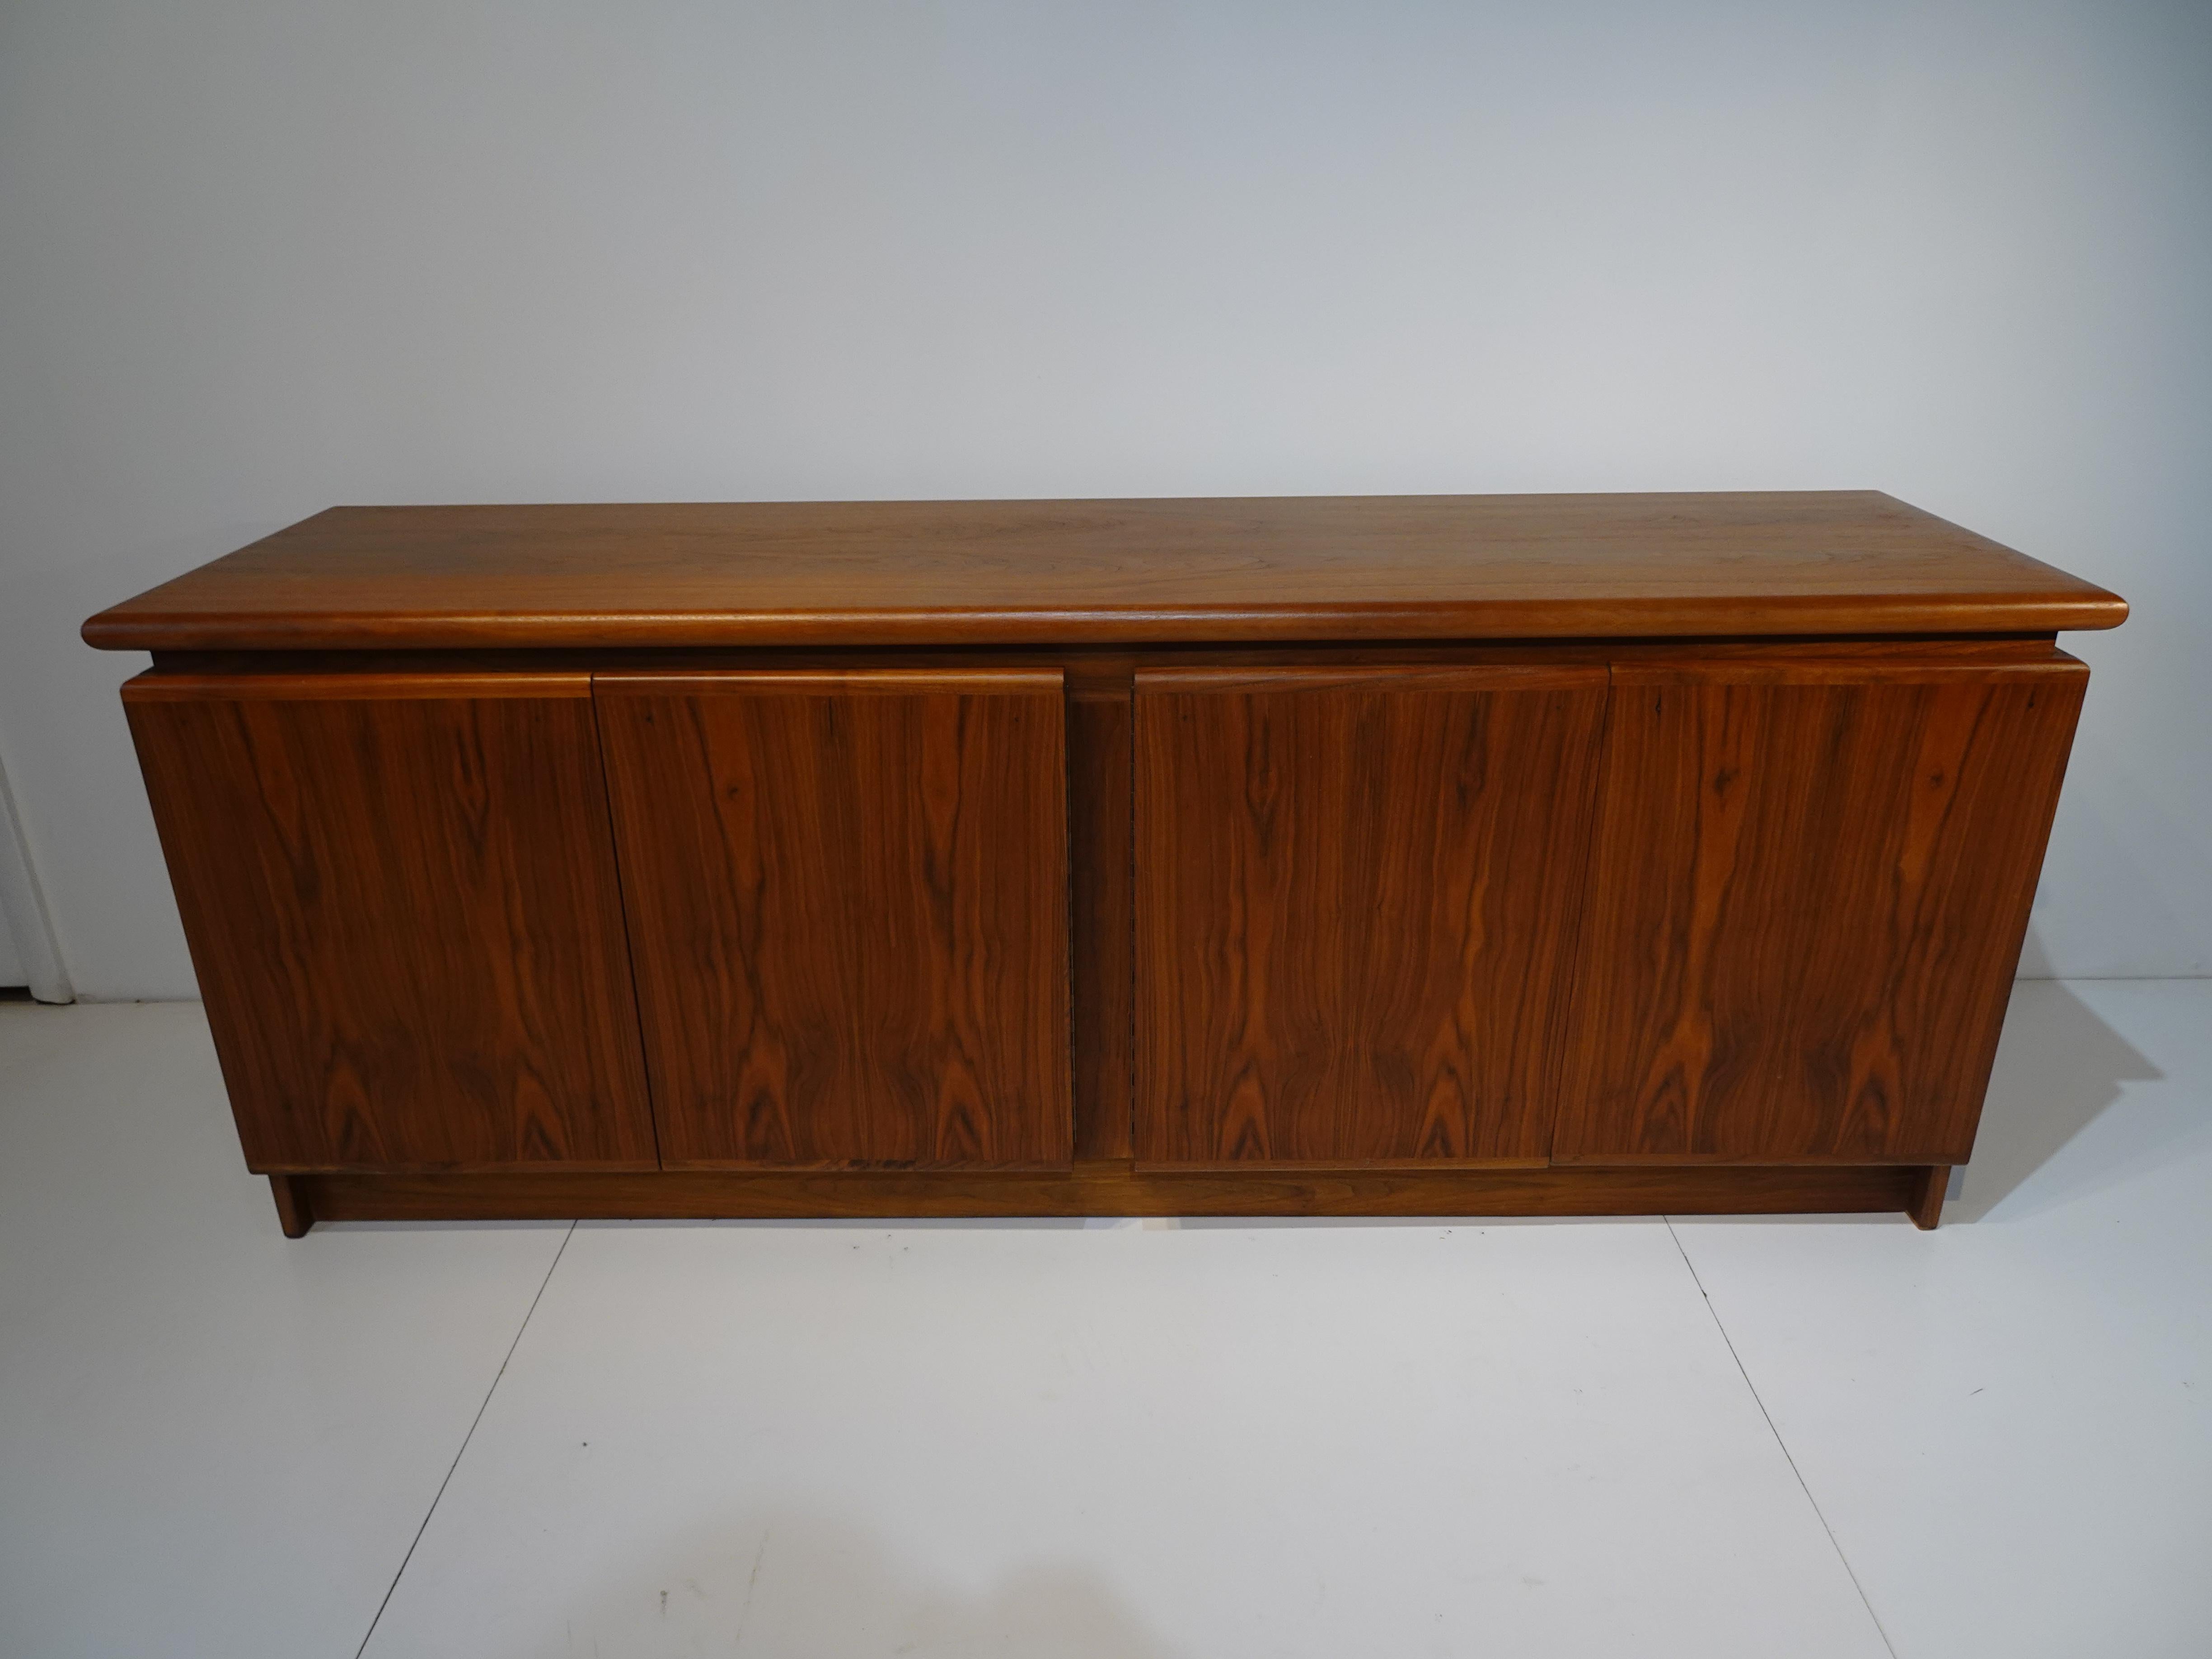 A very well crafted mid century four door walnut credenza or sideboard with adjustable shelves, the top has a floating soft rolled edge giving the piece great lines . The wood has flamed book matched walnut graining to the doors and sides, made in